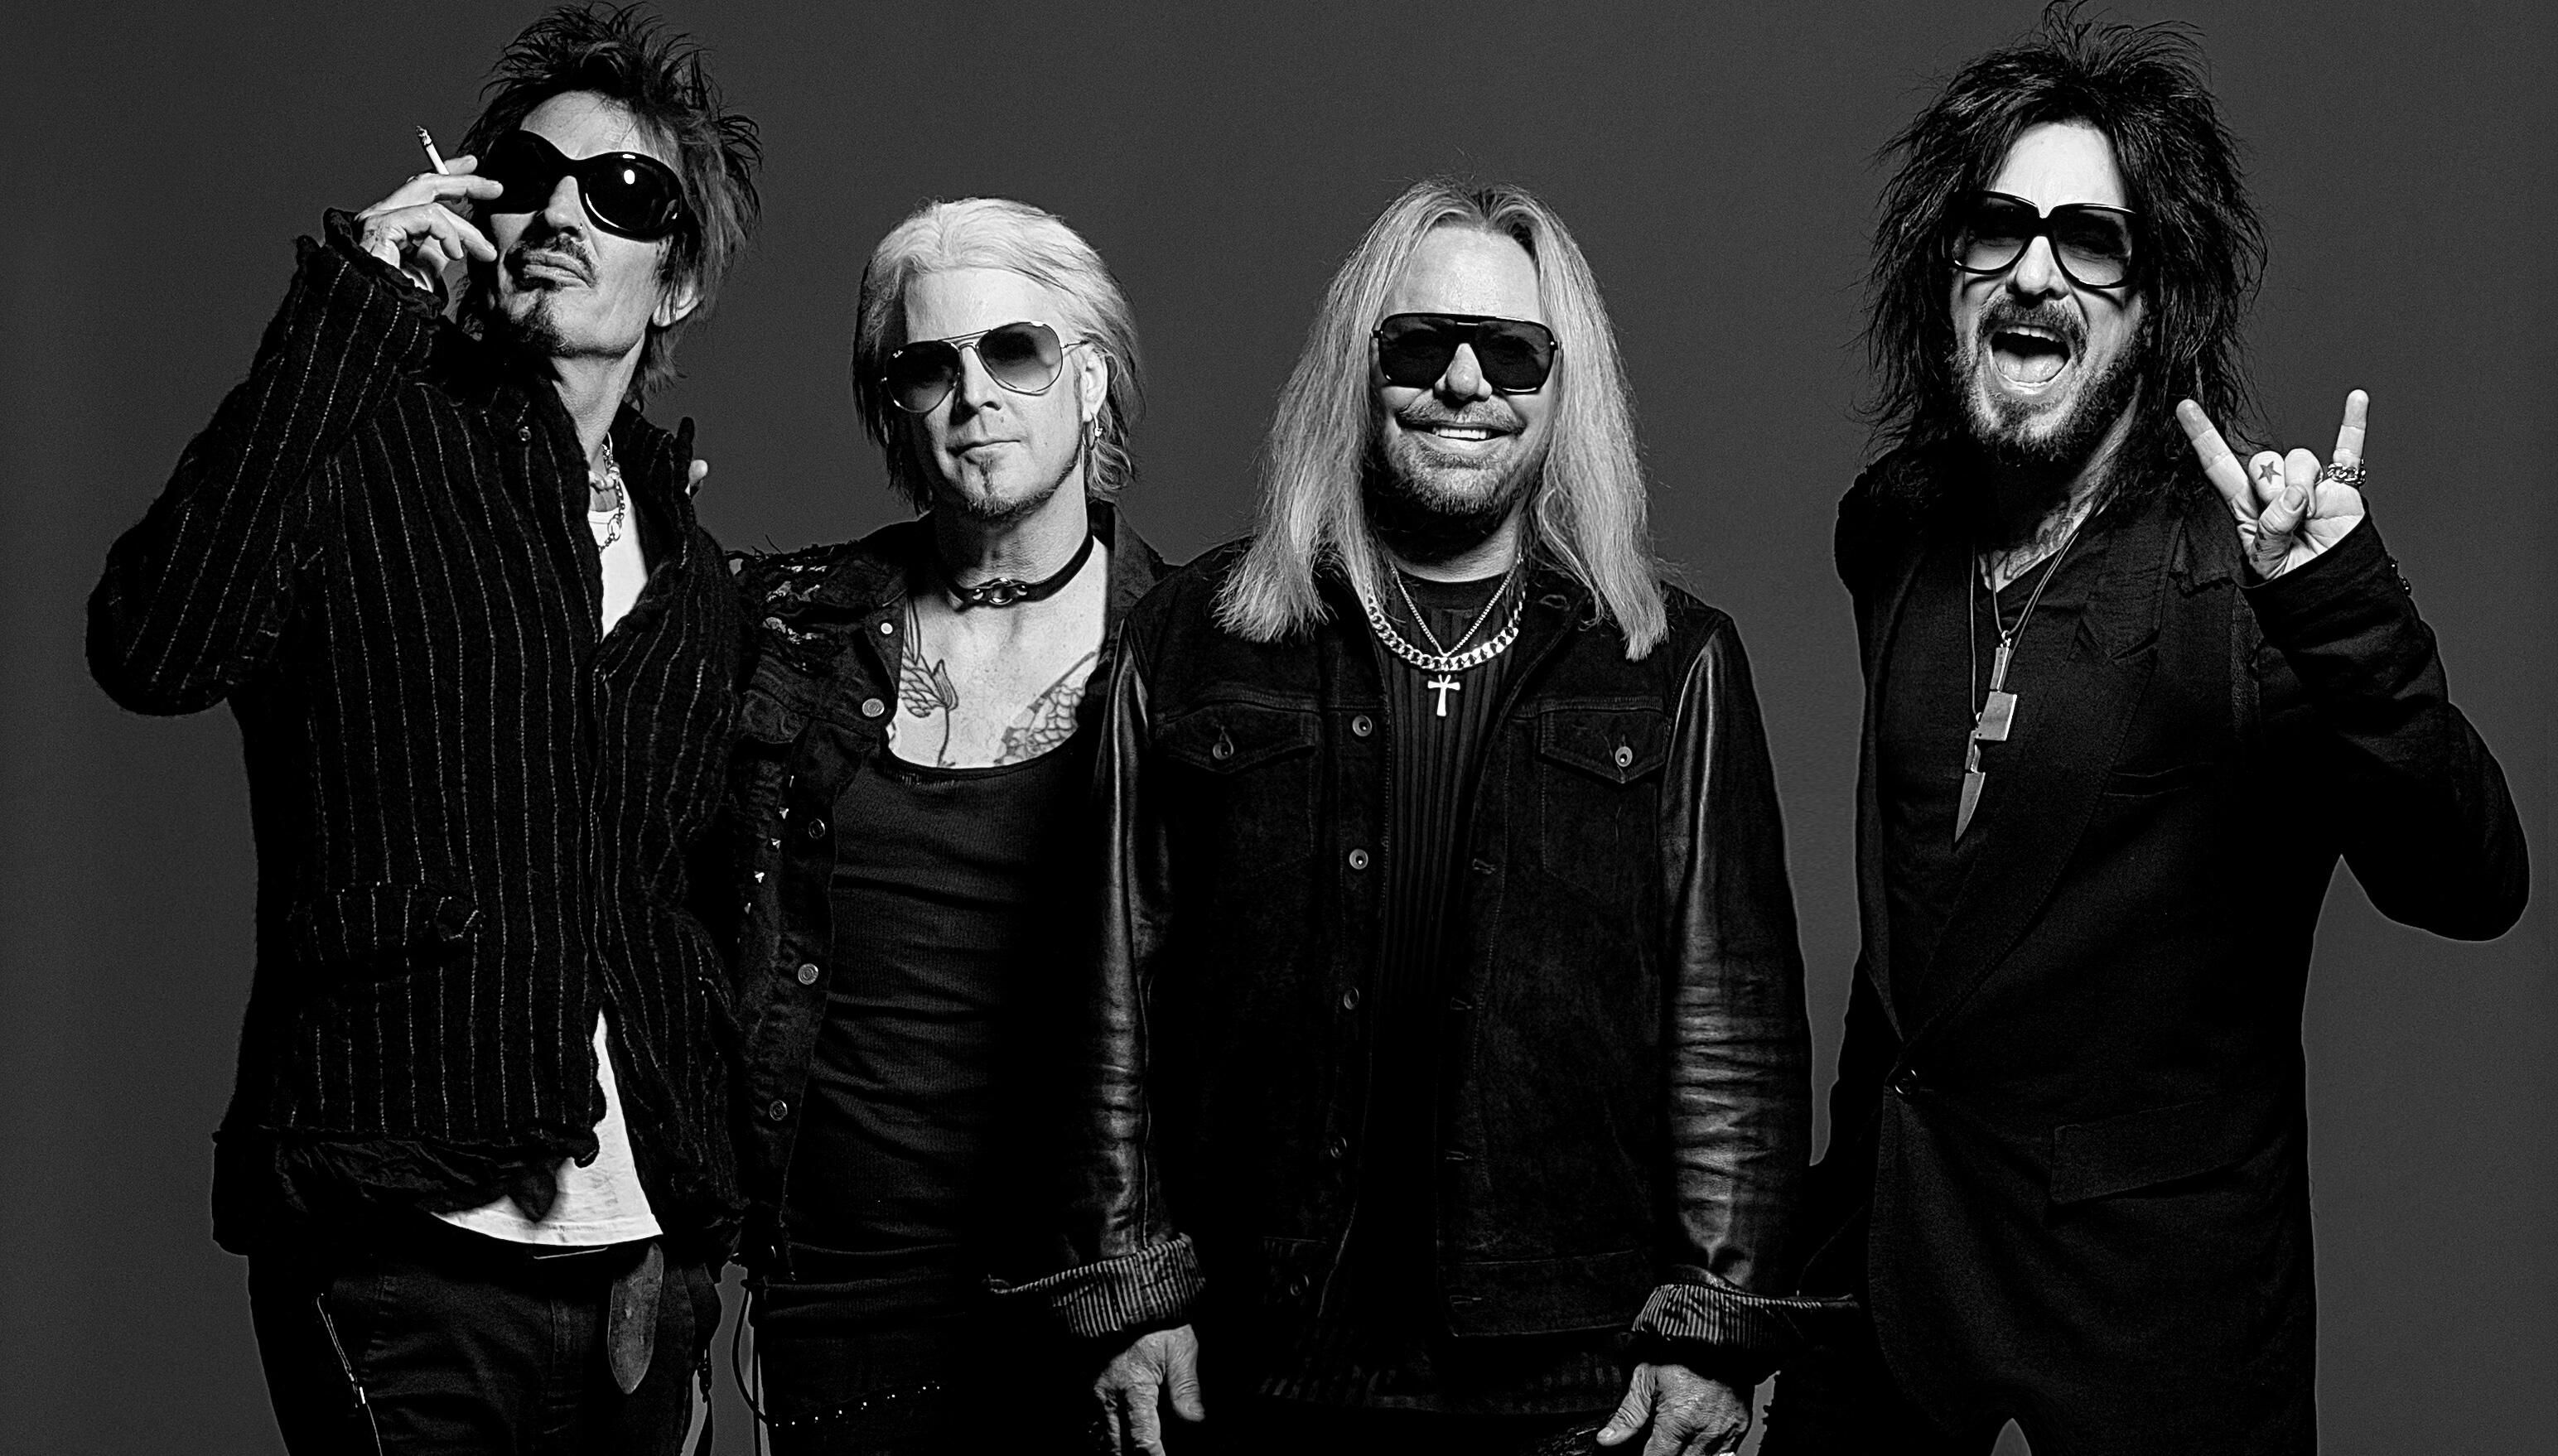 Vince Neil, Tommy Lee Say John 5 'Inspired' Band To New Music | iHeart